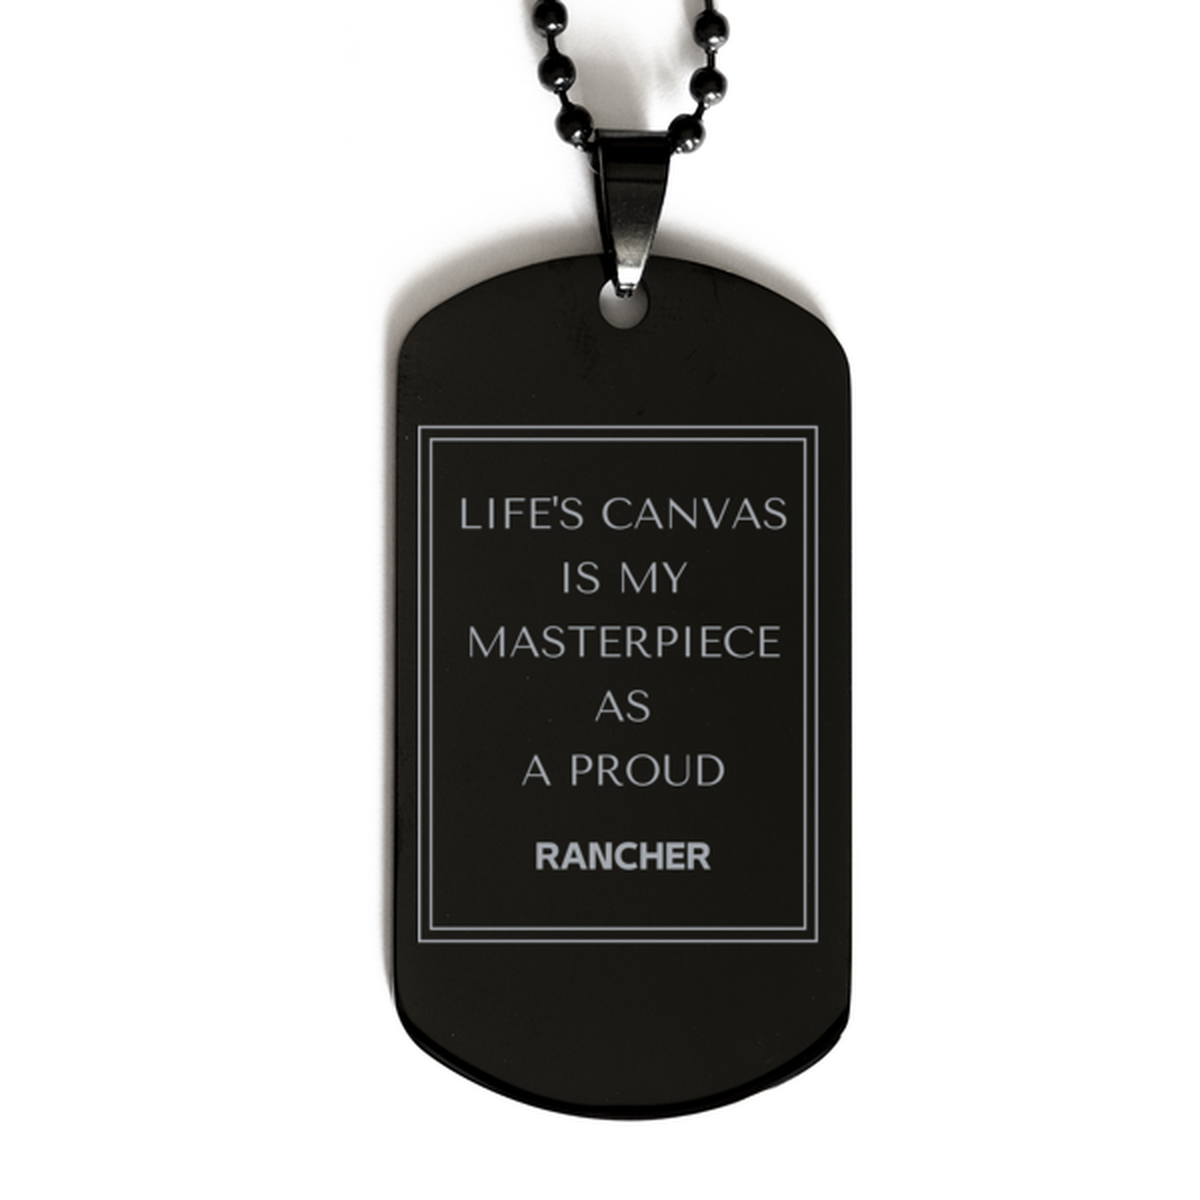 Proud Rancher Gifts, Life's canvas is my masterpiece, Epic Birthday Christmas Unique Black Dog Tag For Rancher, Coworkers, Men, Women, Friends